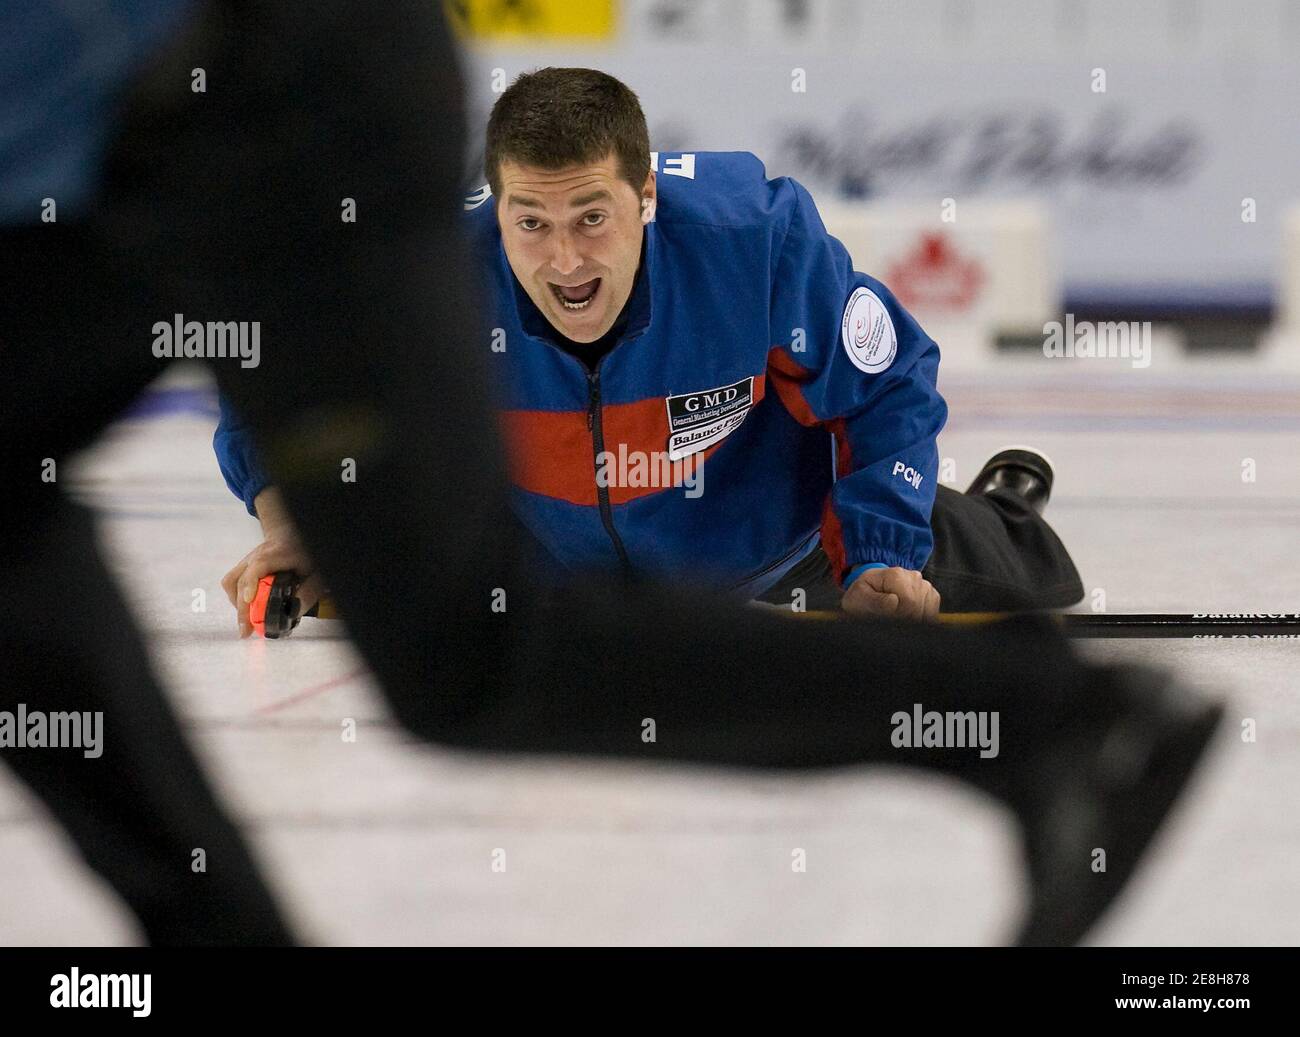 France's skip Thomas Dufour shouts to team mates during their game against Scotland at the World Men's Curling Championships in Grand Forks, North Dakota April 7, 2008.          REUTERS/Andy Clark     (UNITED STATES) Stock Photo